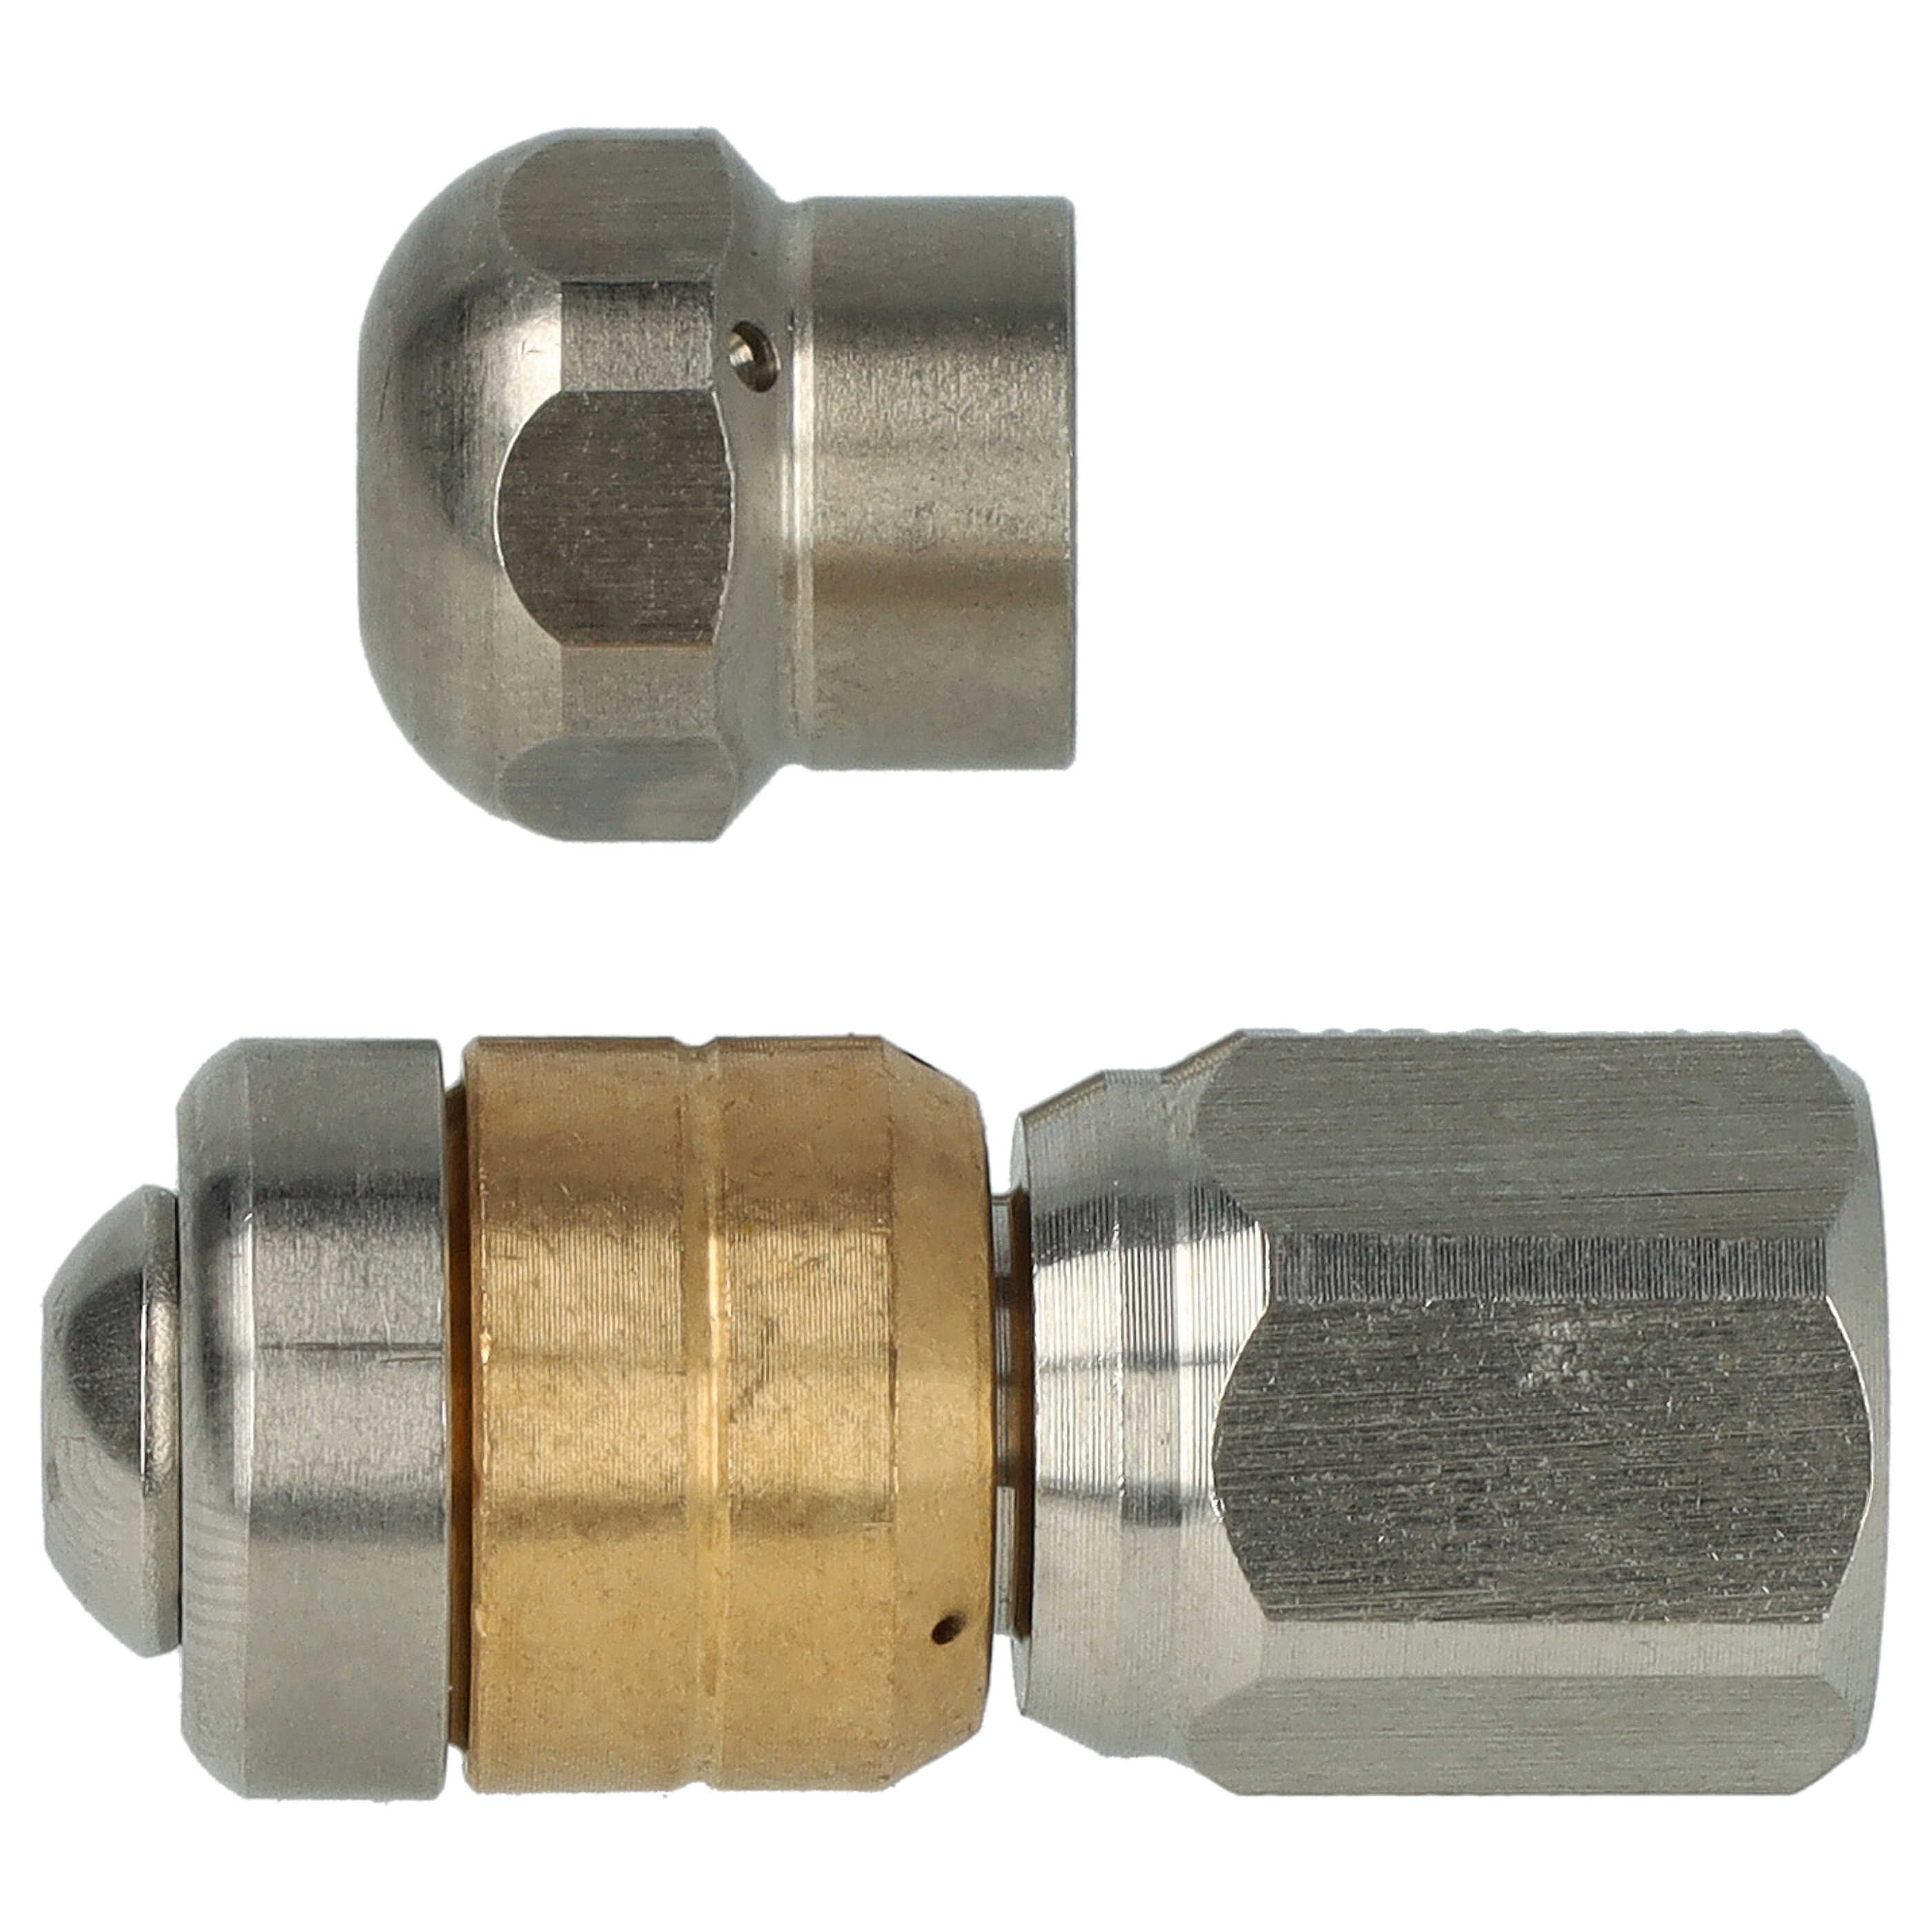 2x Pipe Cleaning Nozzles as Replacement for Kränzle KNF045 - Stainless Steel, Fixed + Rotatable